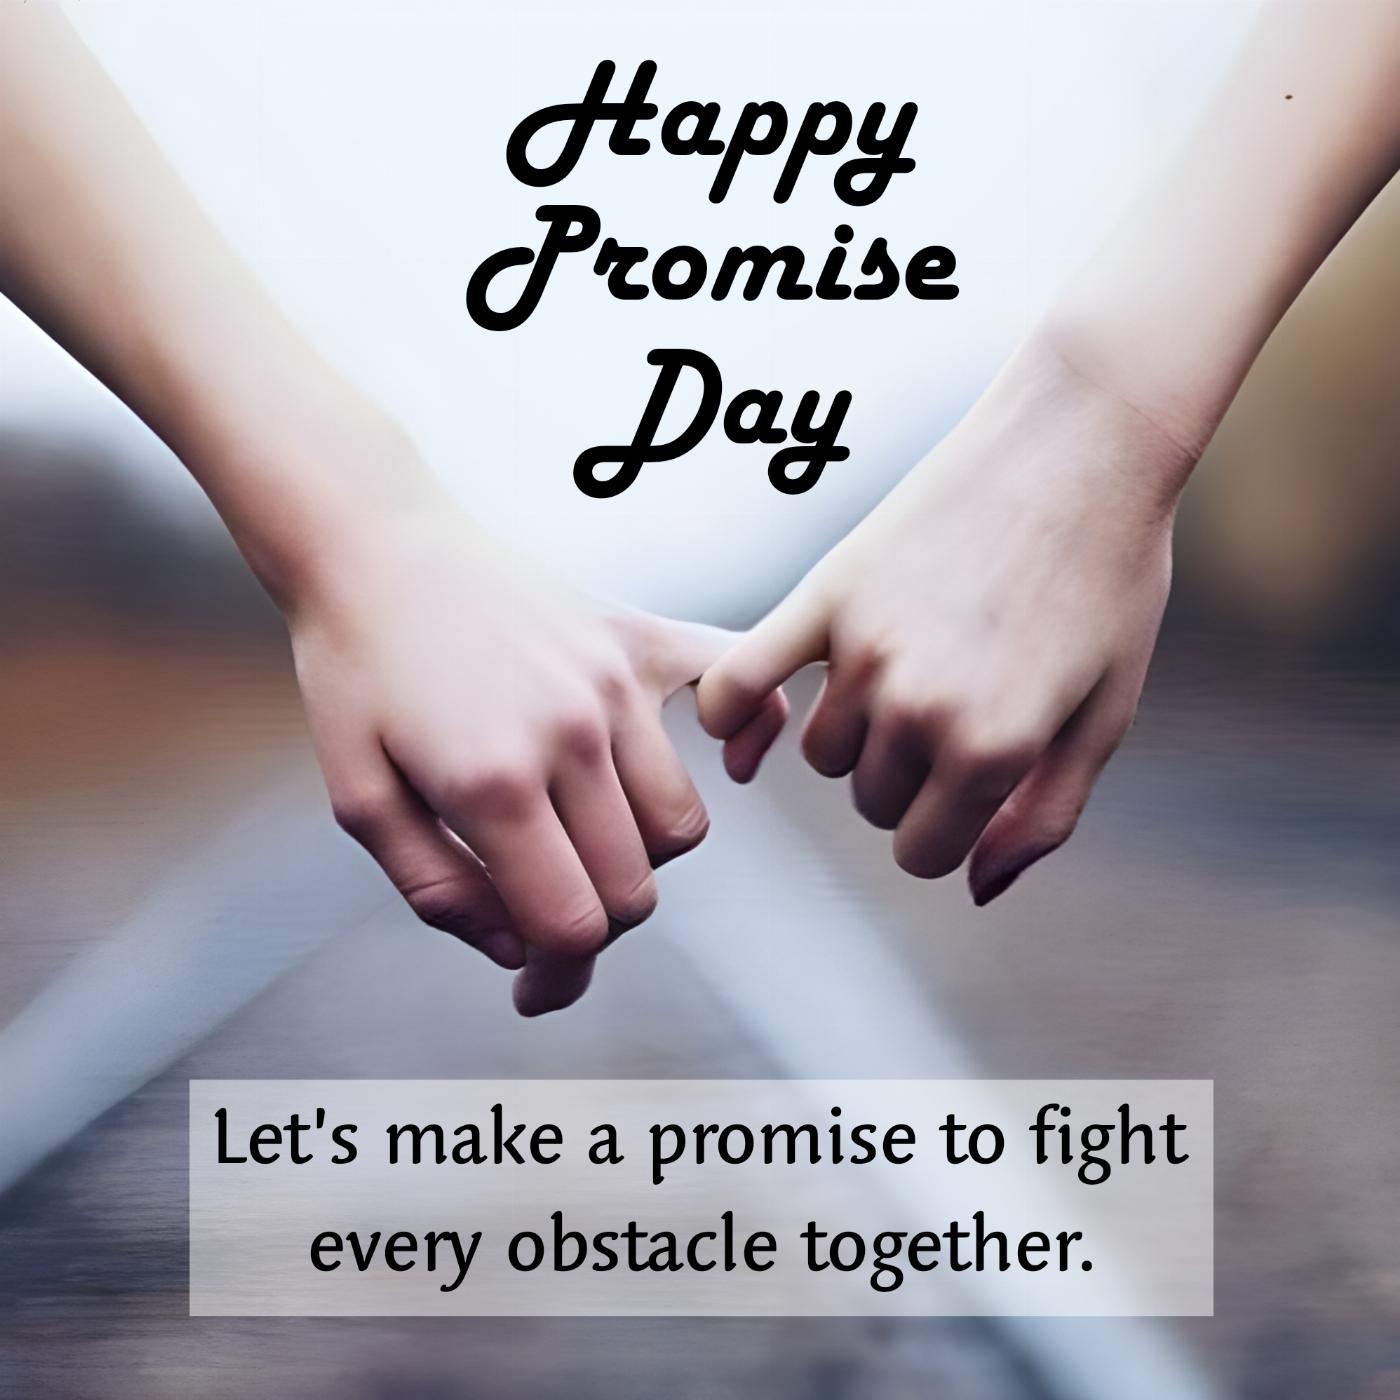 Lets make a promise to fight every obstacle together